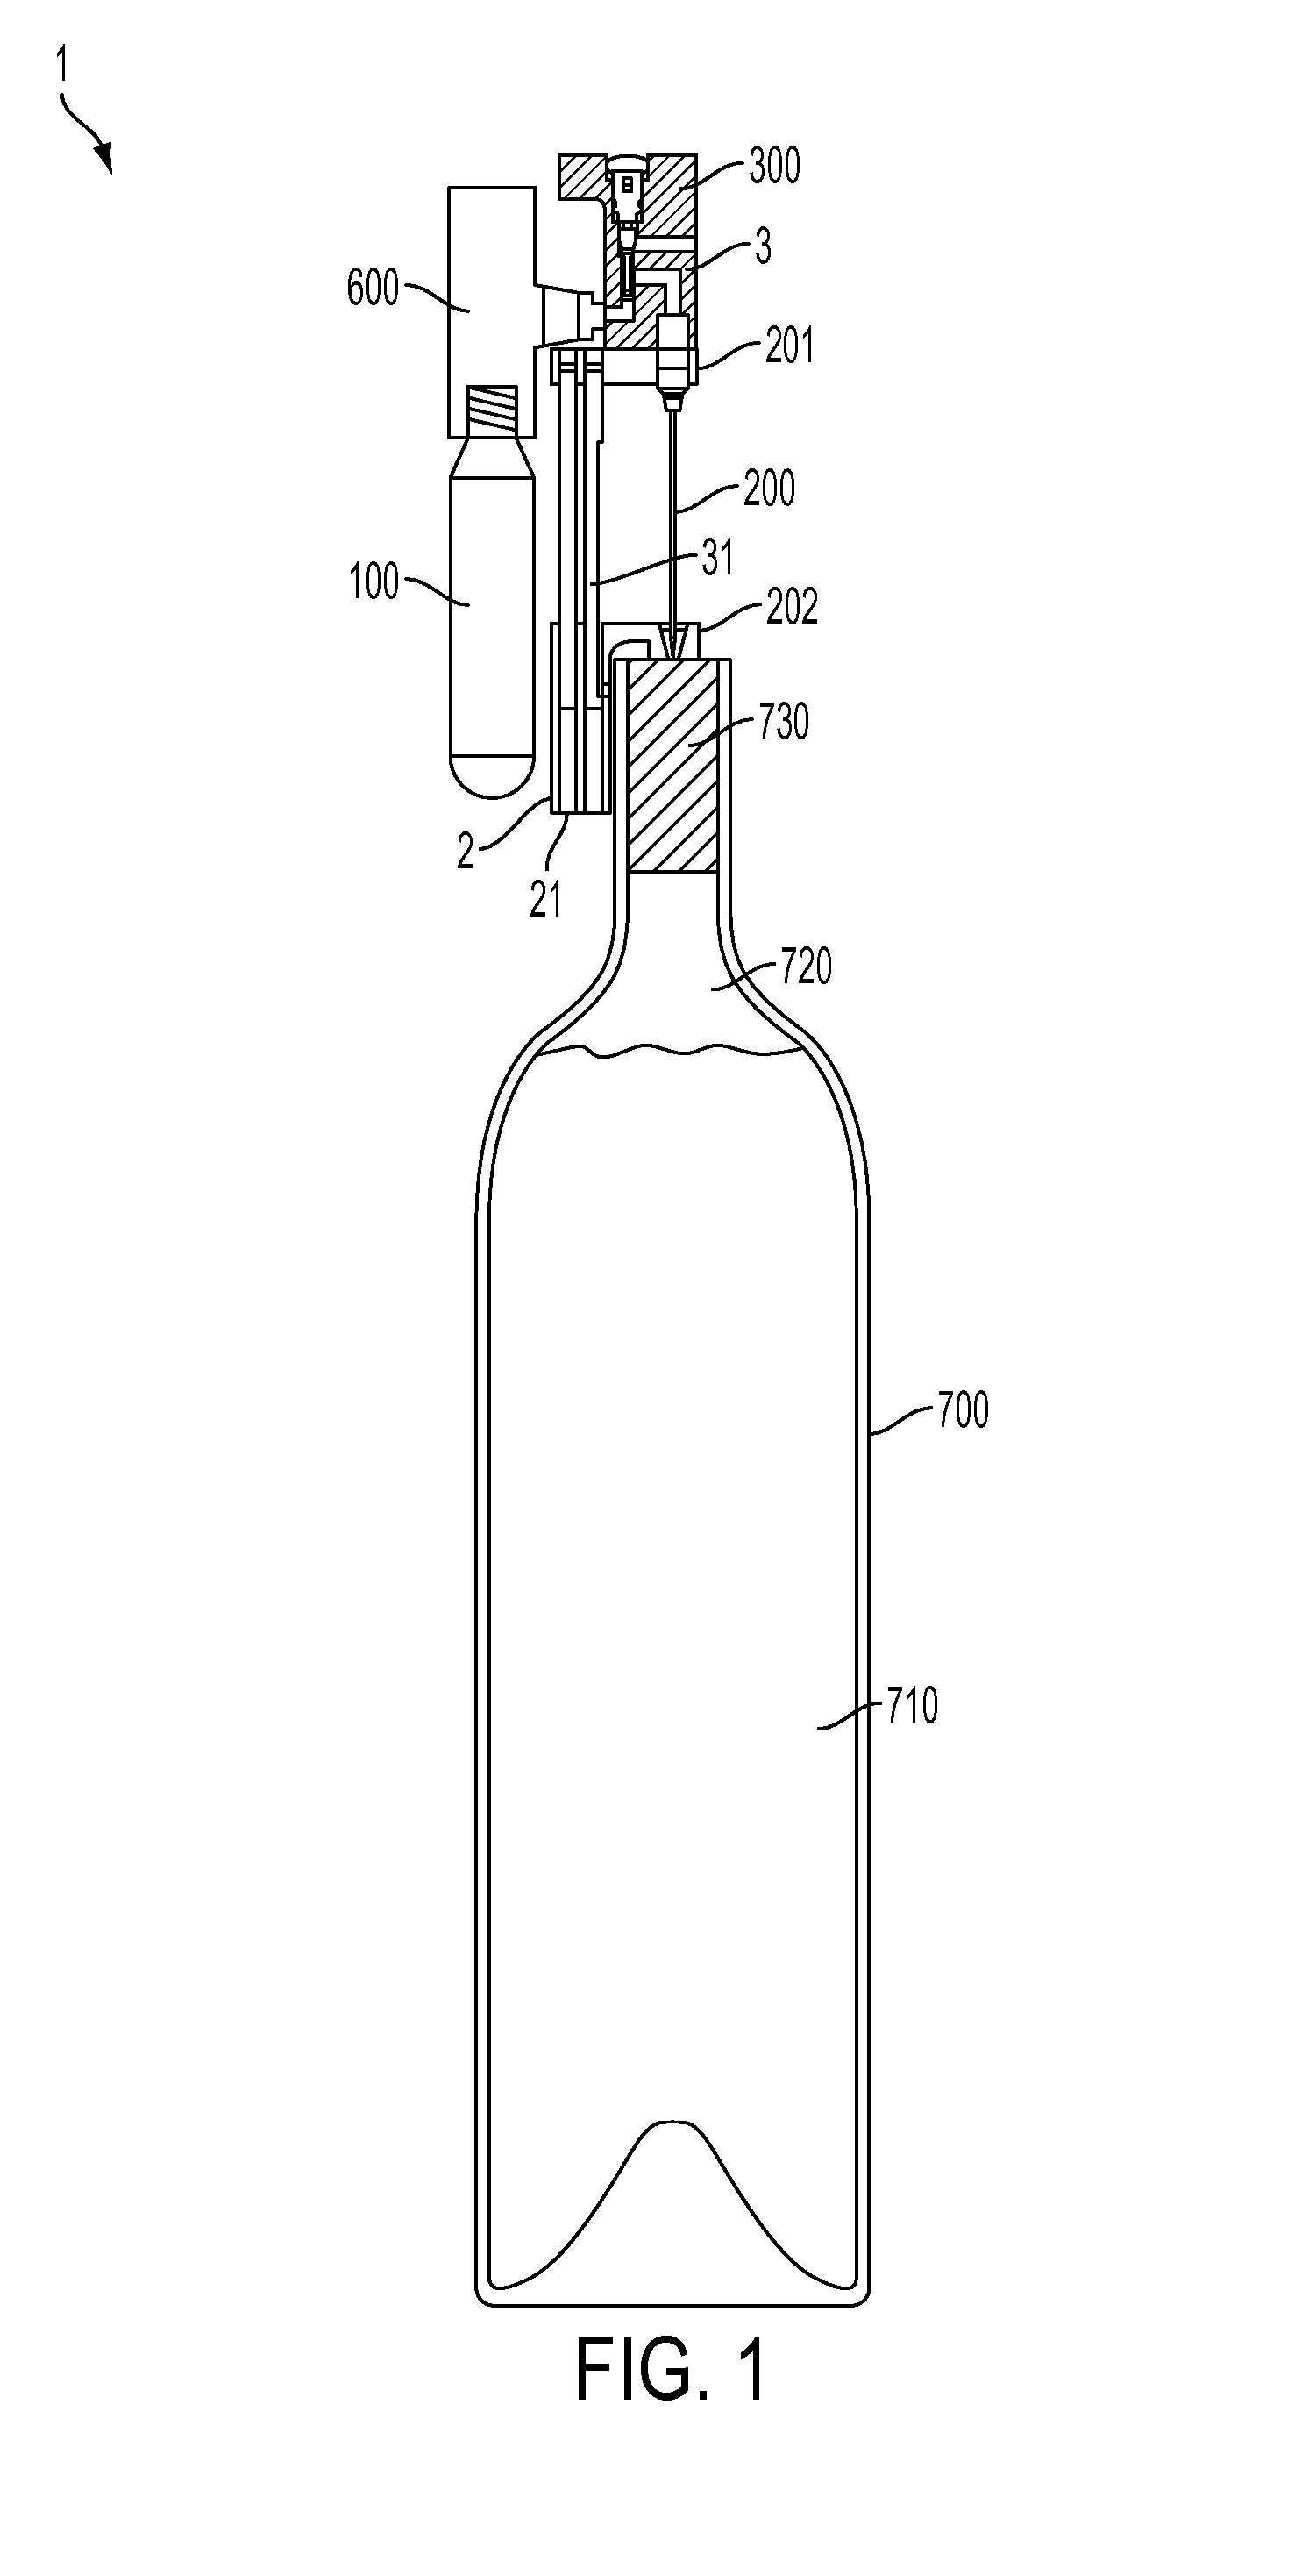 Method and apparatus for beverage extraction with improved gas cylinder access